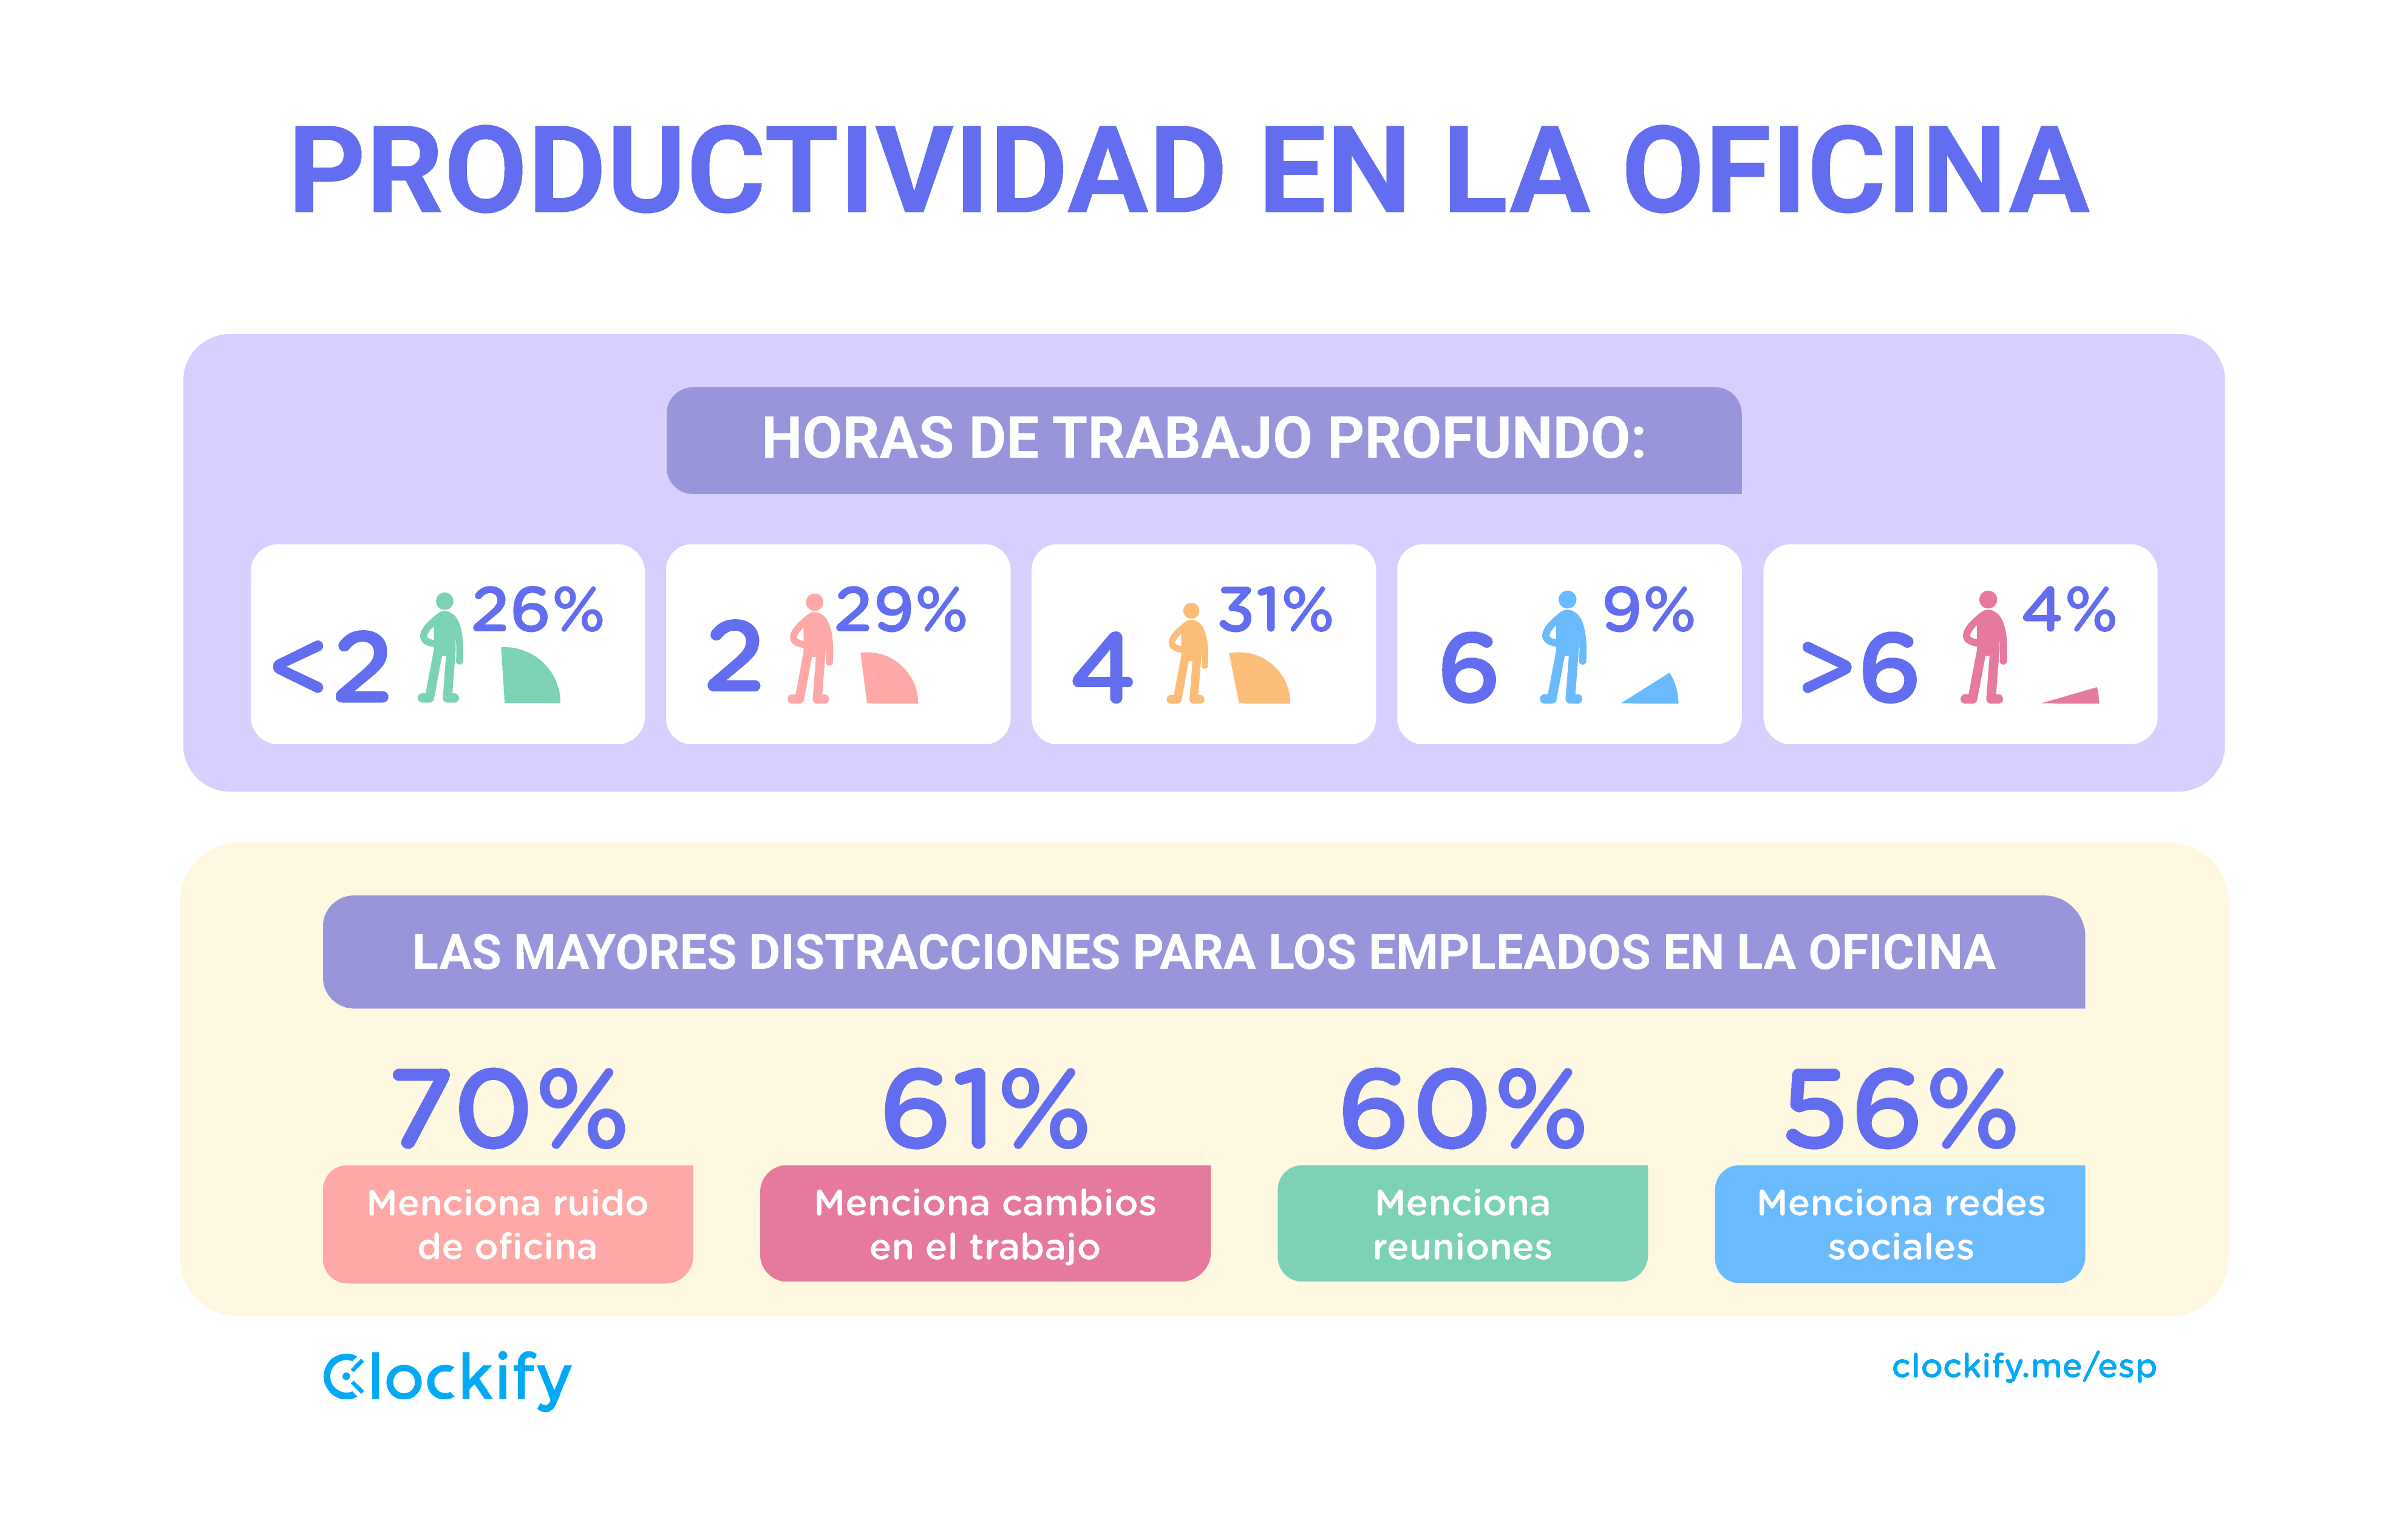 In office productivity graphic